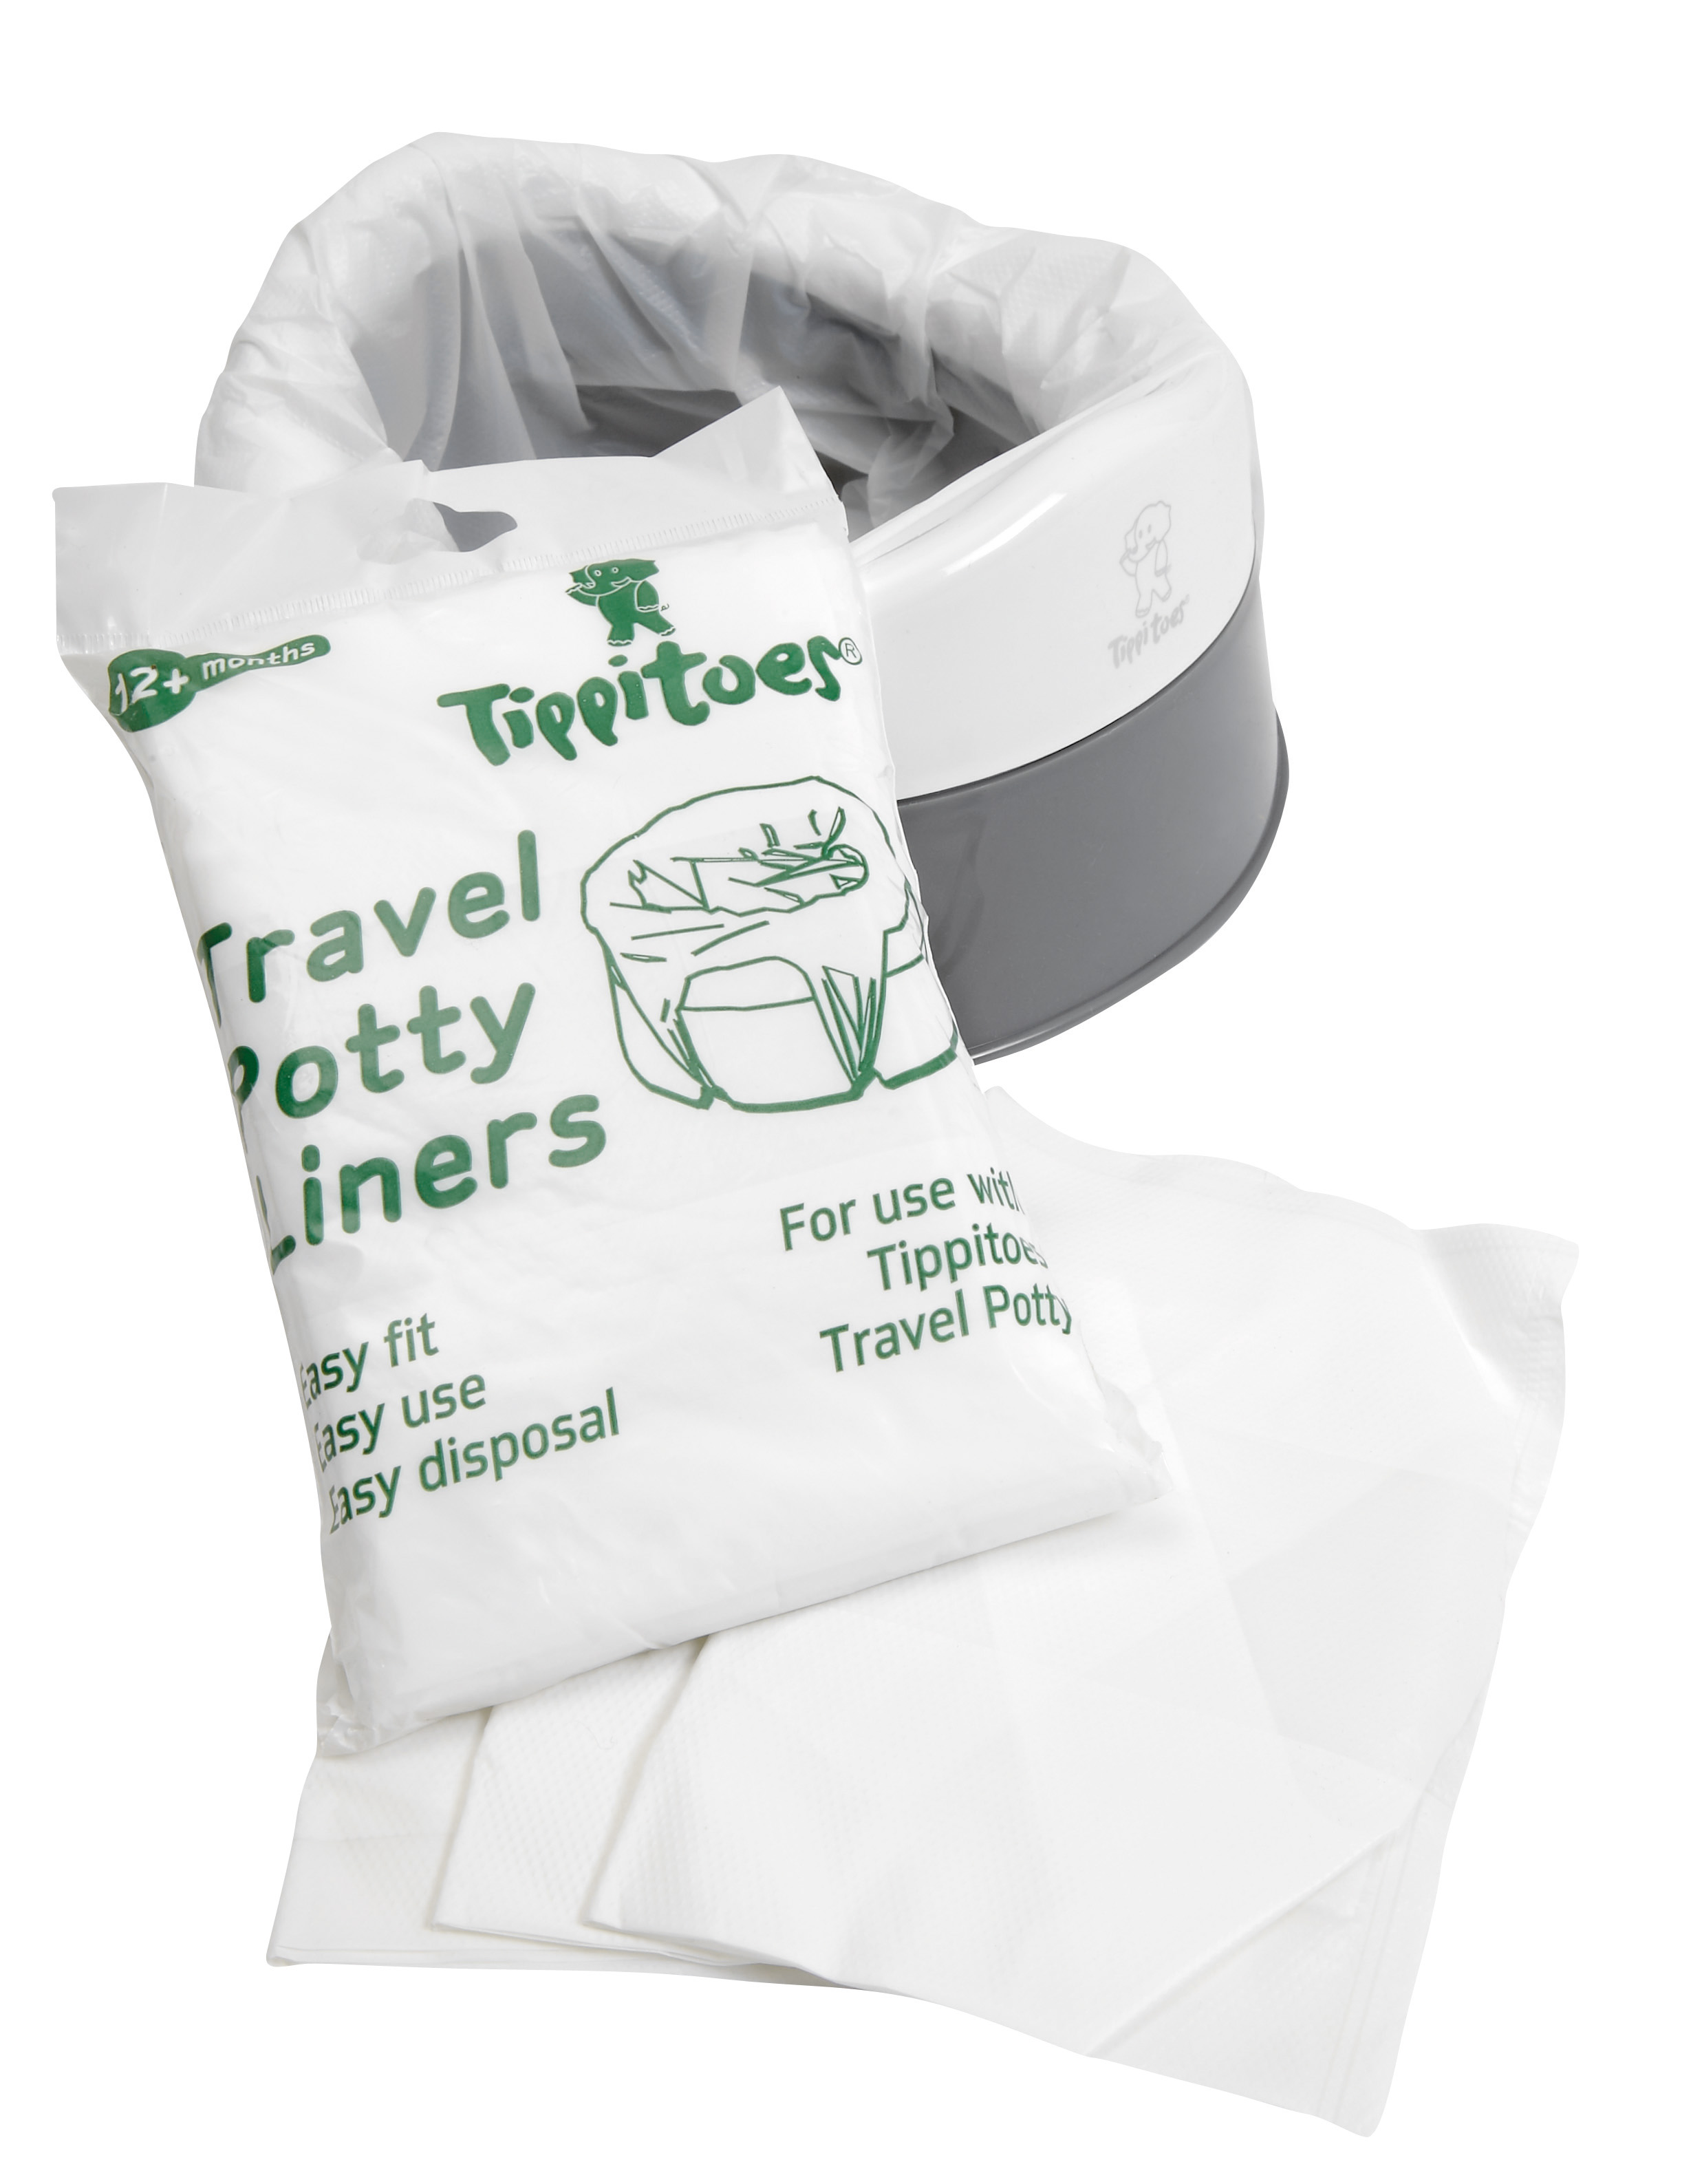 Tippitoes travel Potty